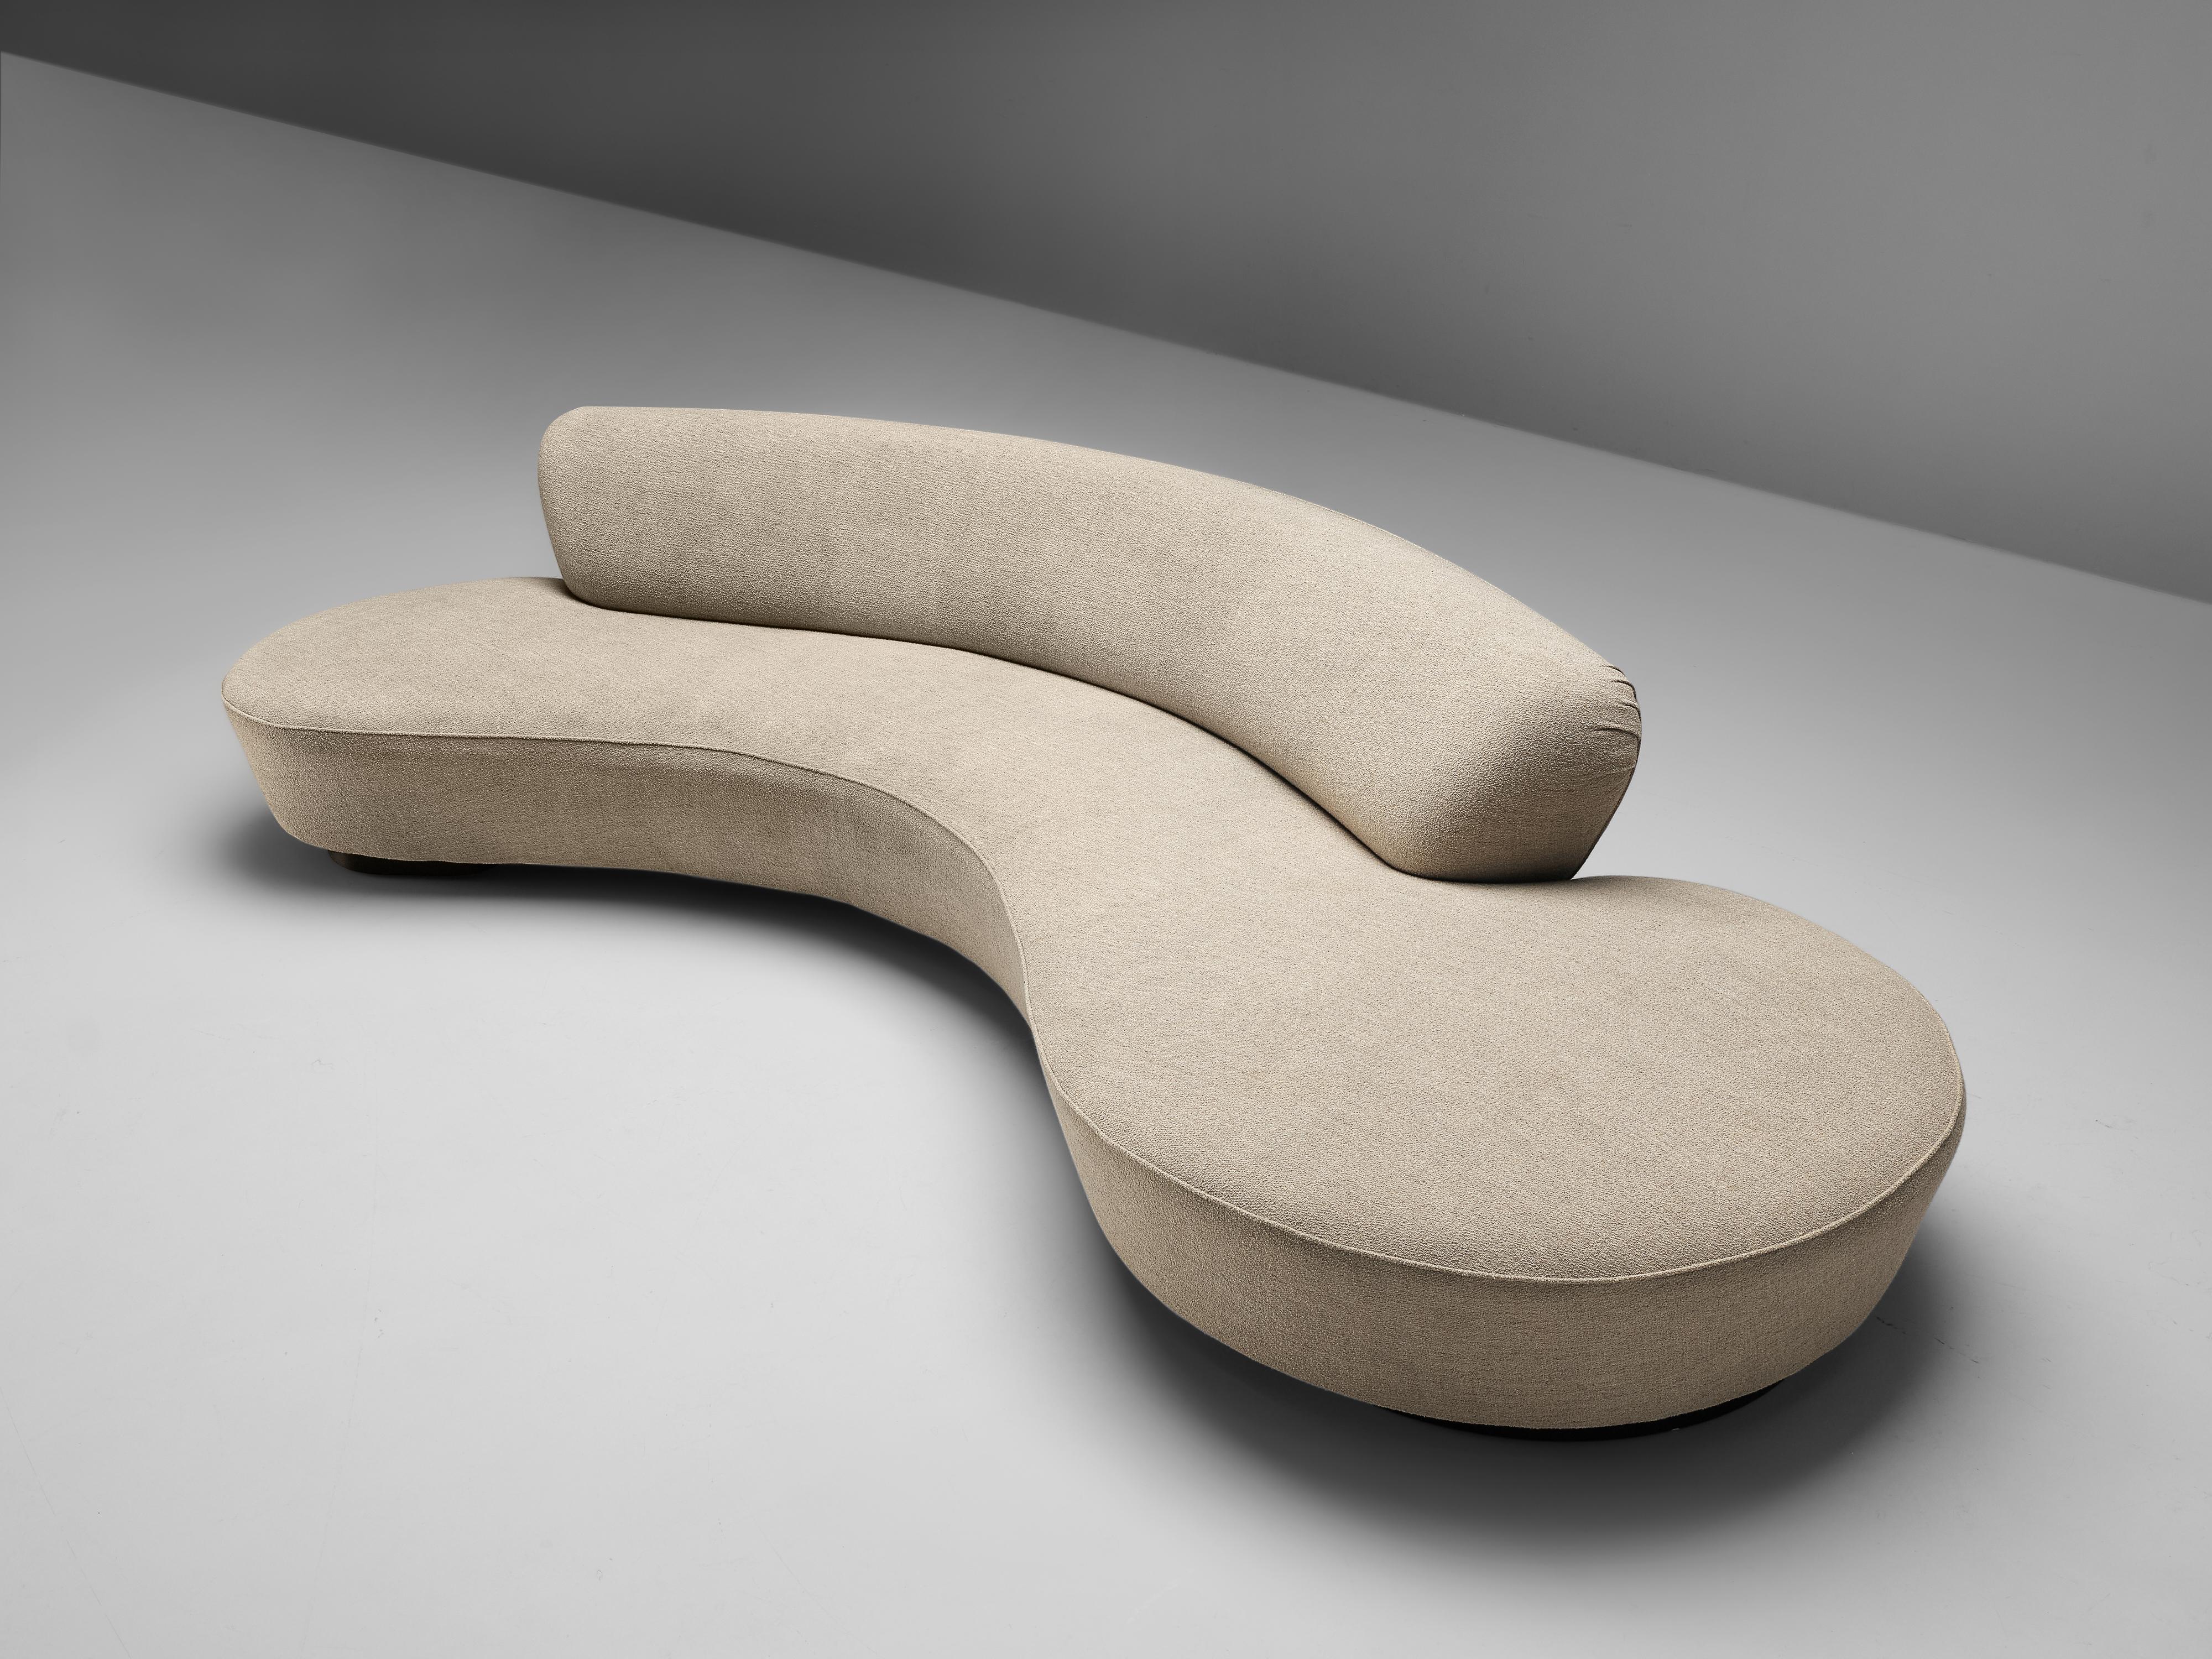 Vladimir Kagan, sofa model ‘Serpentine’, fabric upholstery, United States, design 1950s

Beautiful Vladimir Kagan sofa in off-white upholstery that embraces the sensuous curves. Due to the organic shape and the absence of strict angles, the sofa